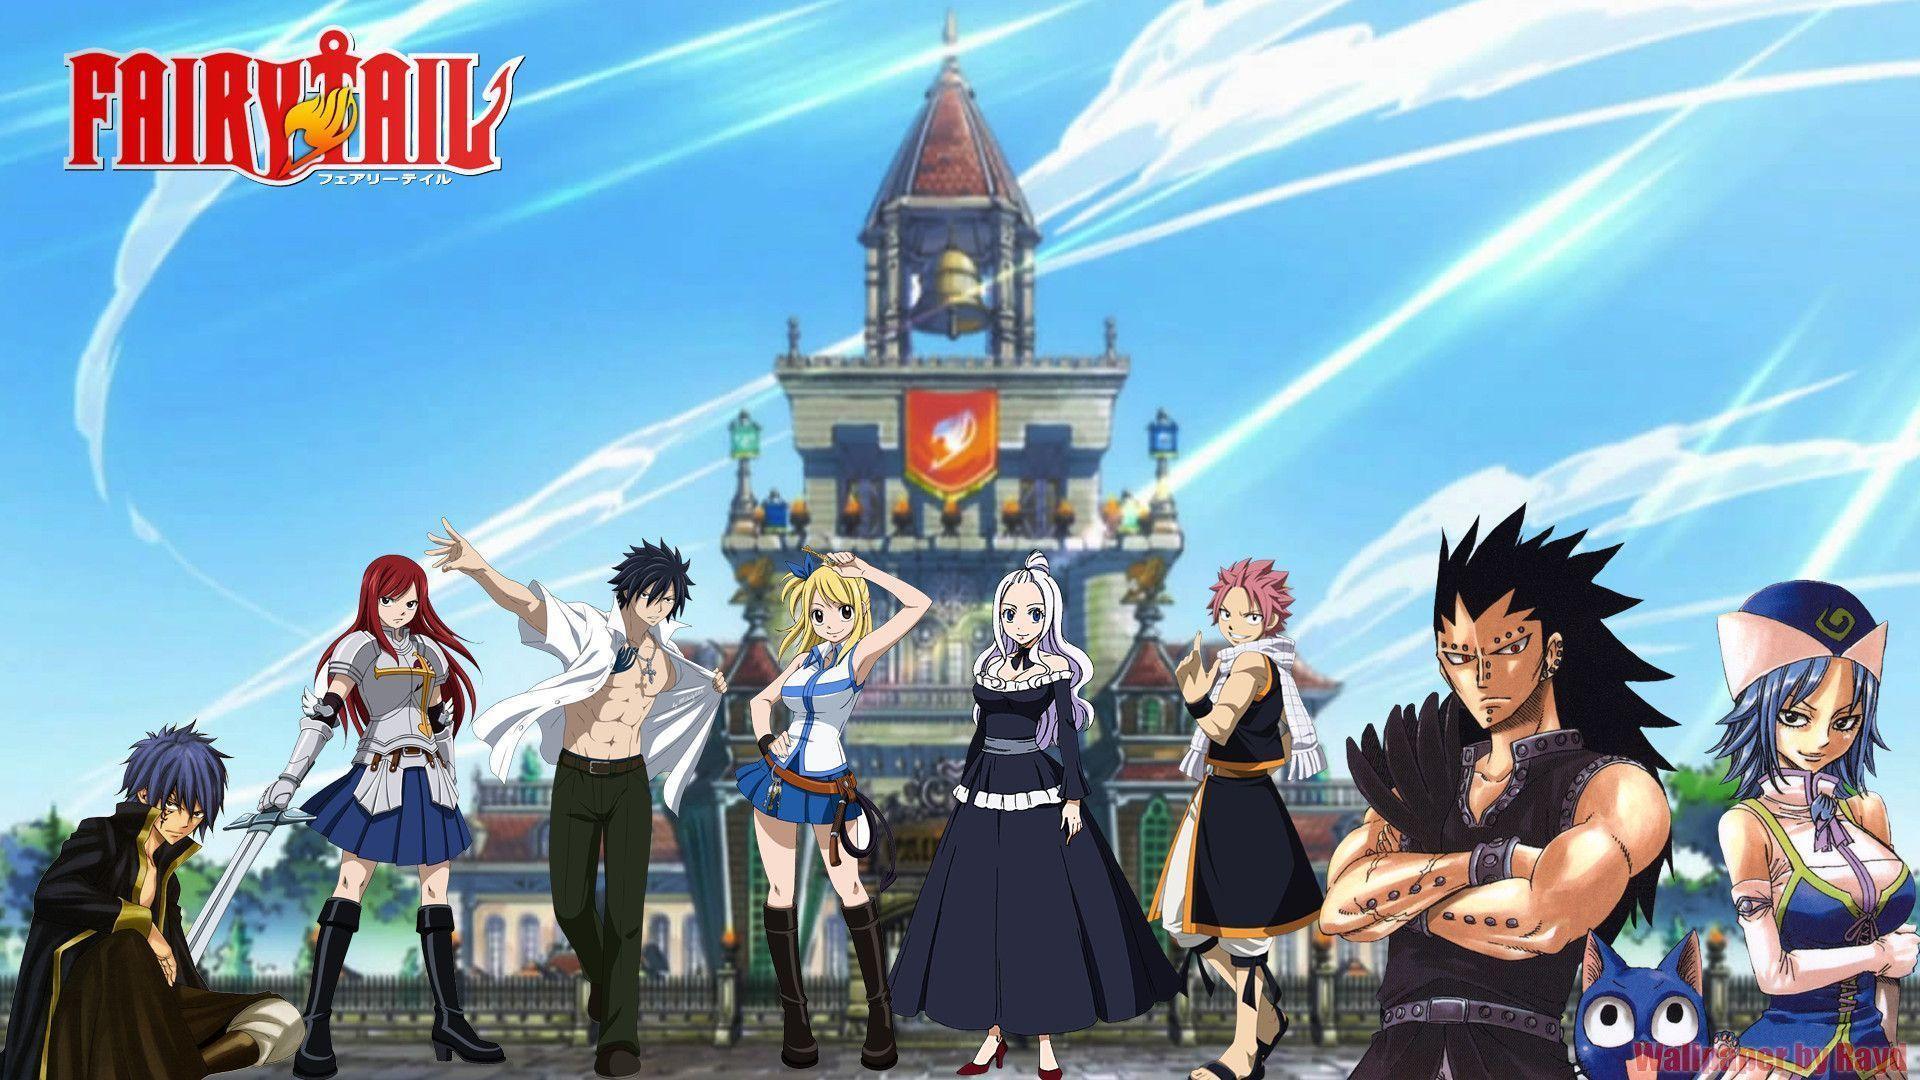 Fairy Tail Wallpaper 1920x1080 px Free Download ID